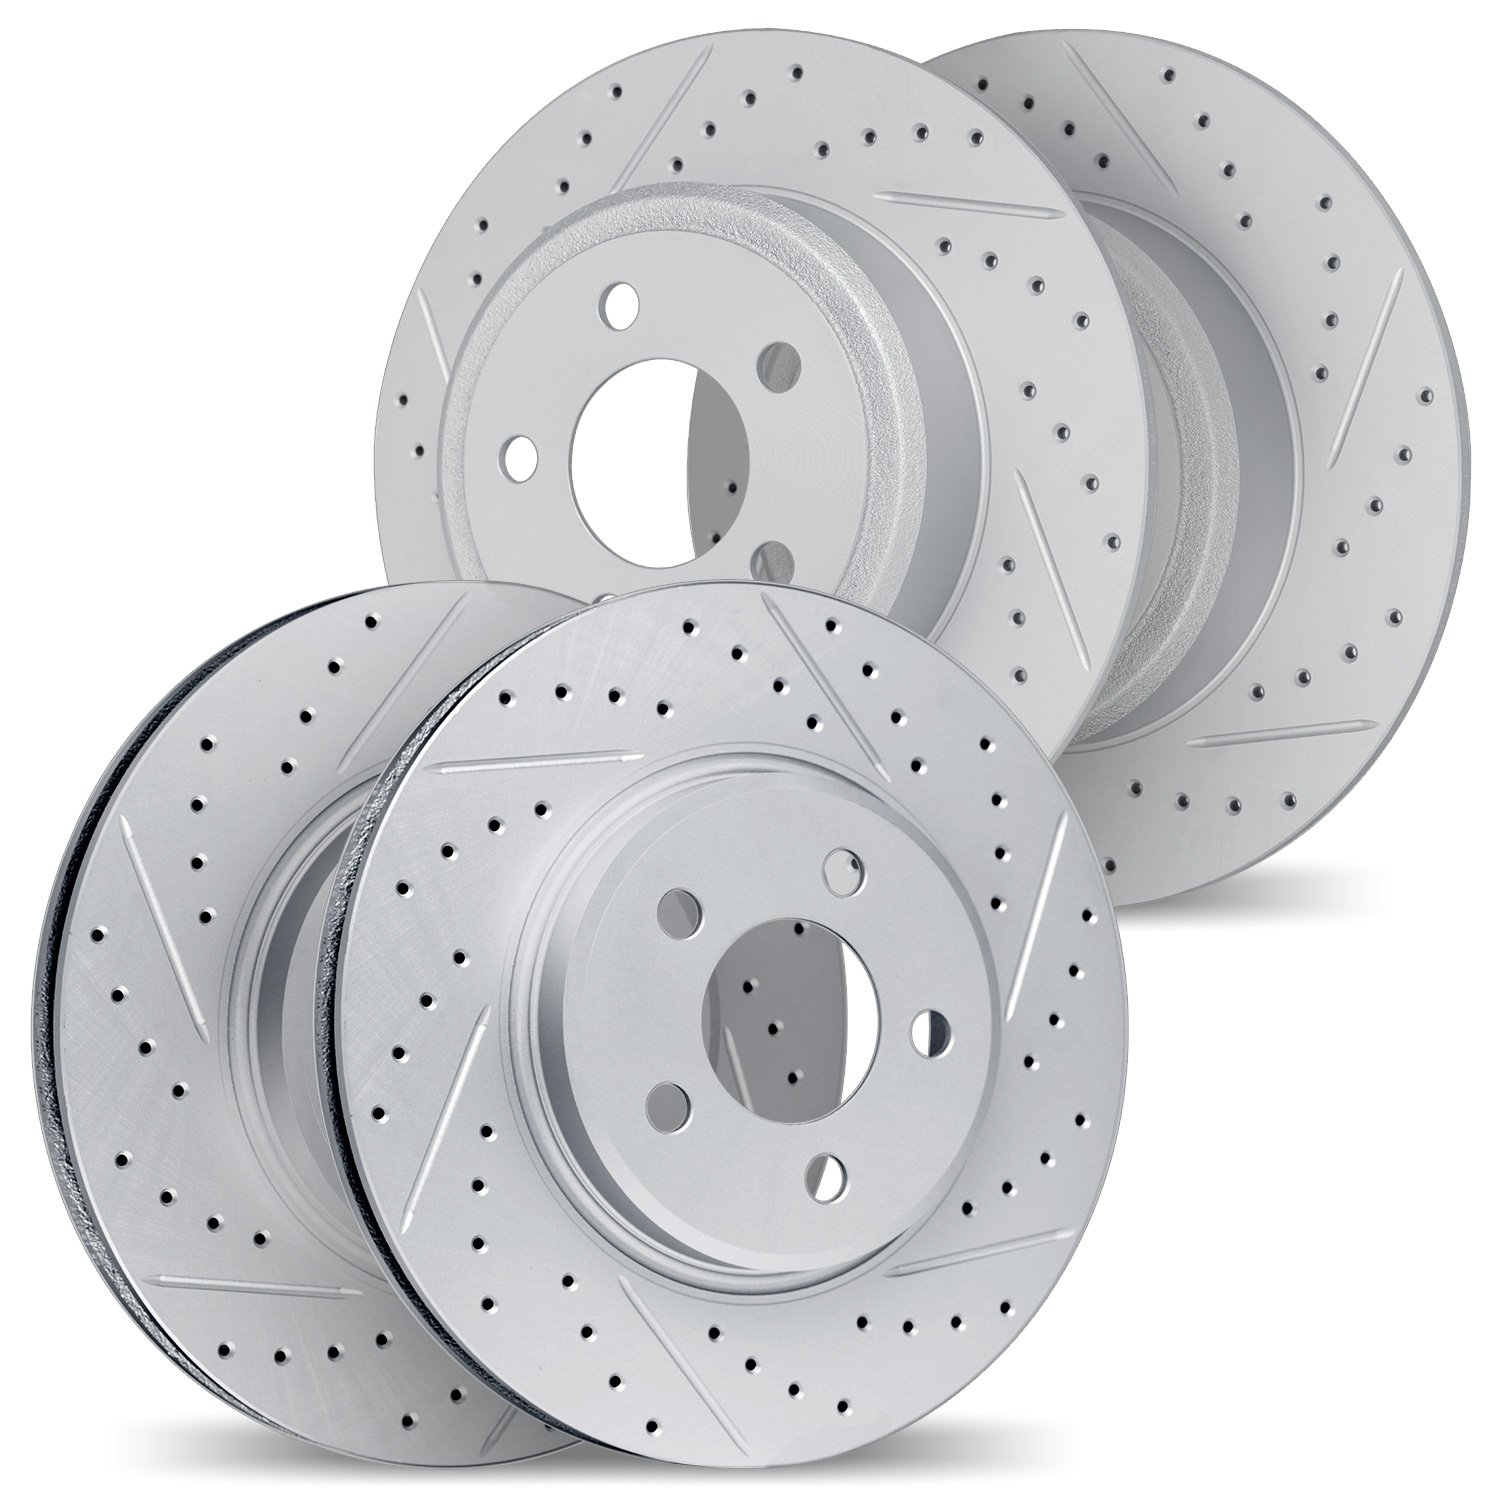 2004-13029 Geoperformance Drilled/Slotted Brake Rotors, Fits Select Subaru, Position: Front and Rear